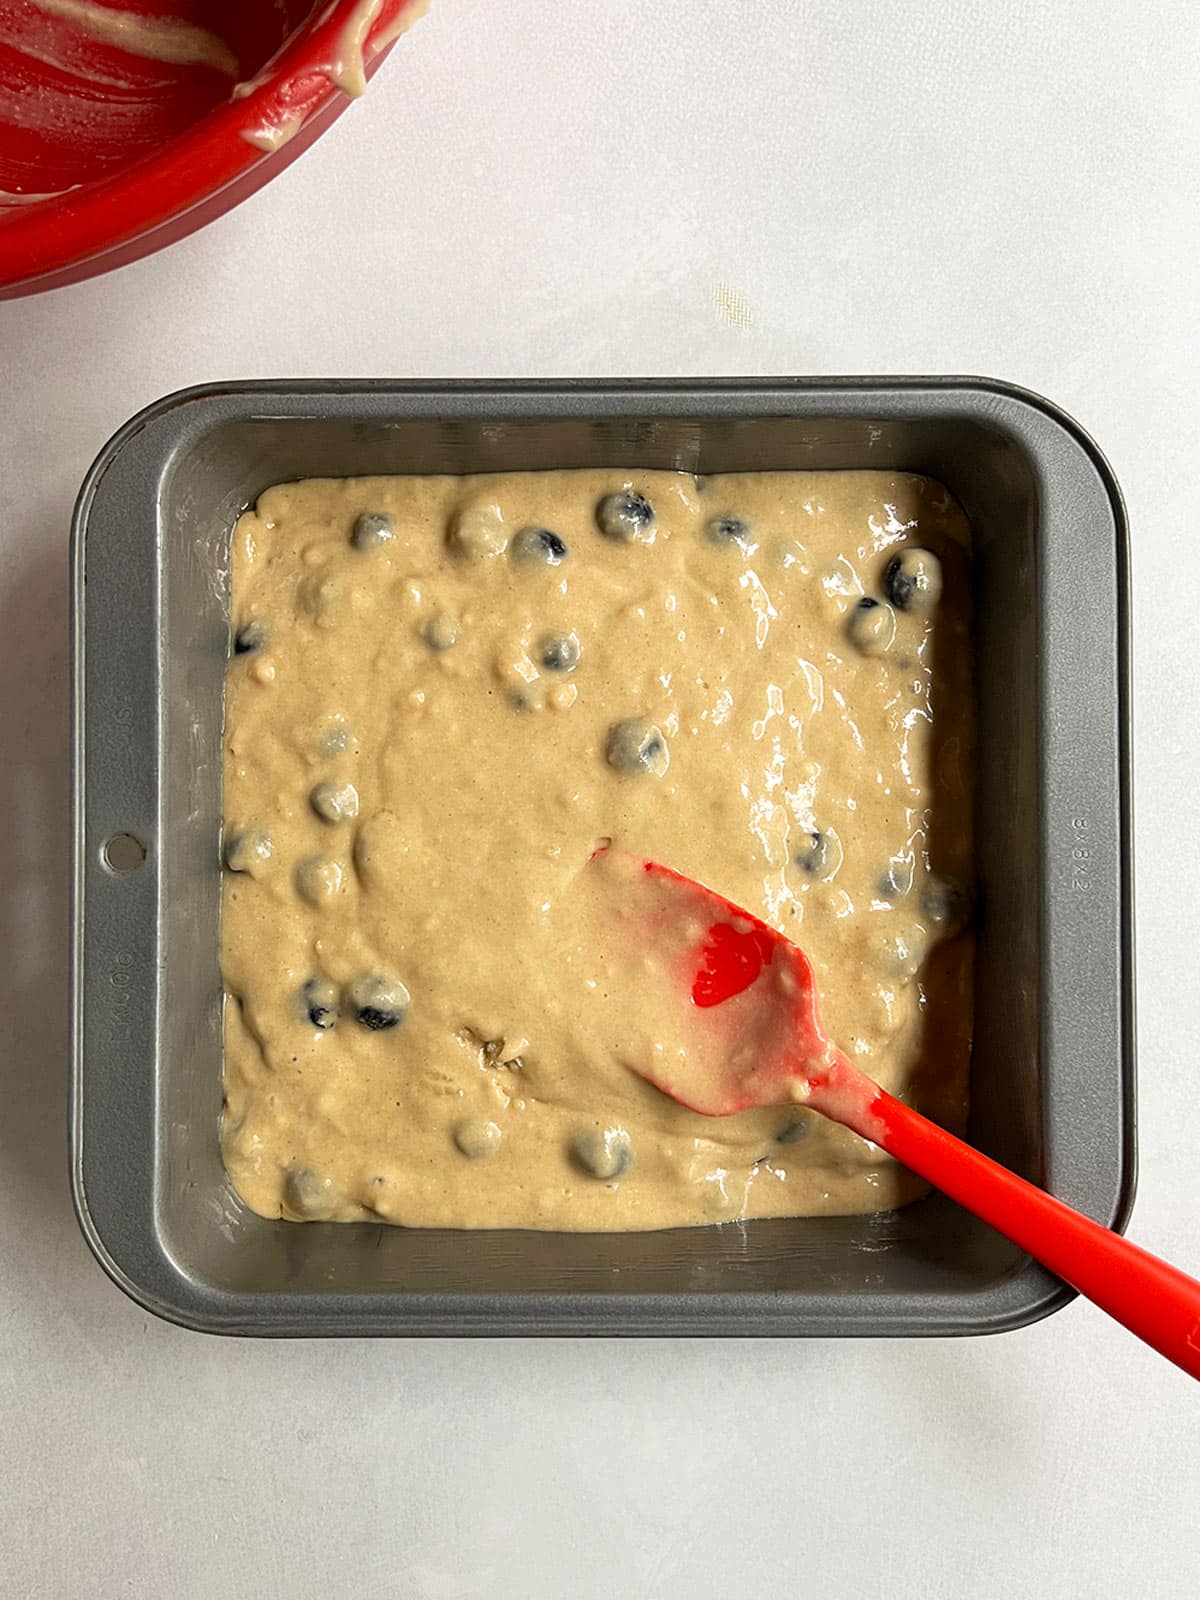 Blueberry loaf cake batter in the square cake pan ready to bake.